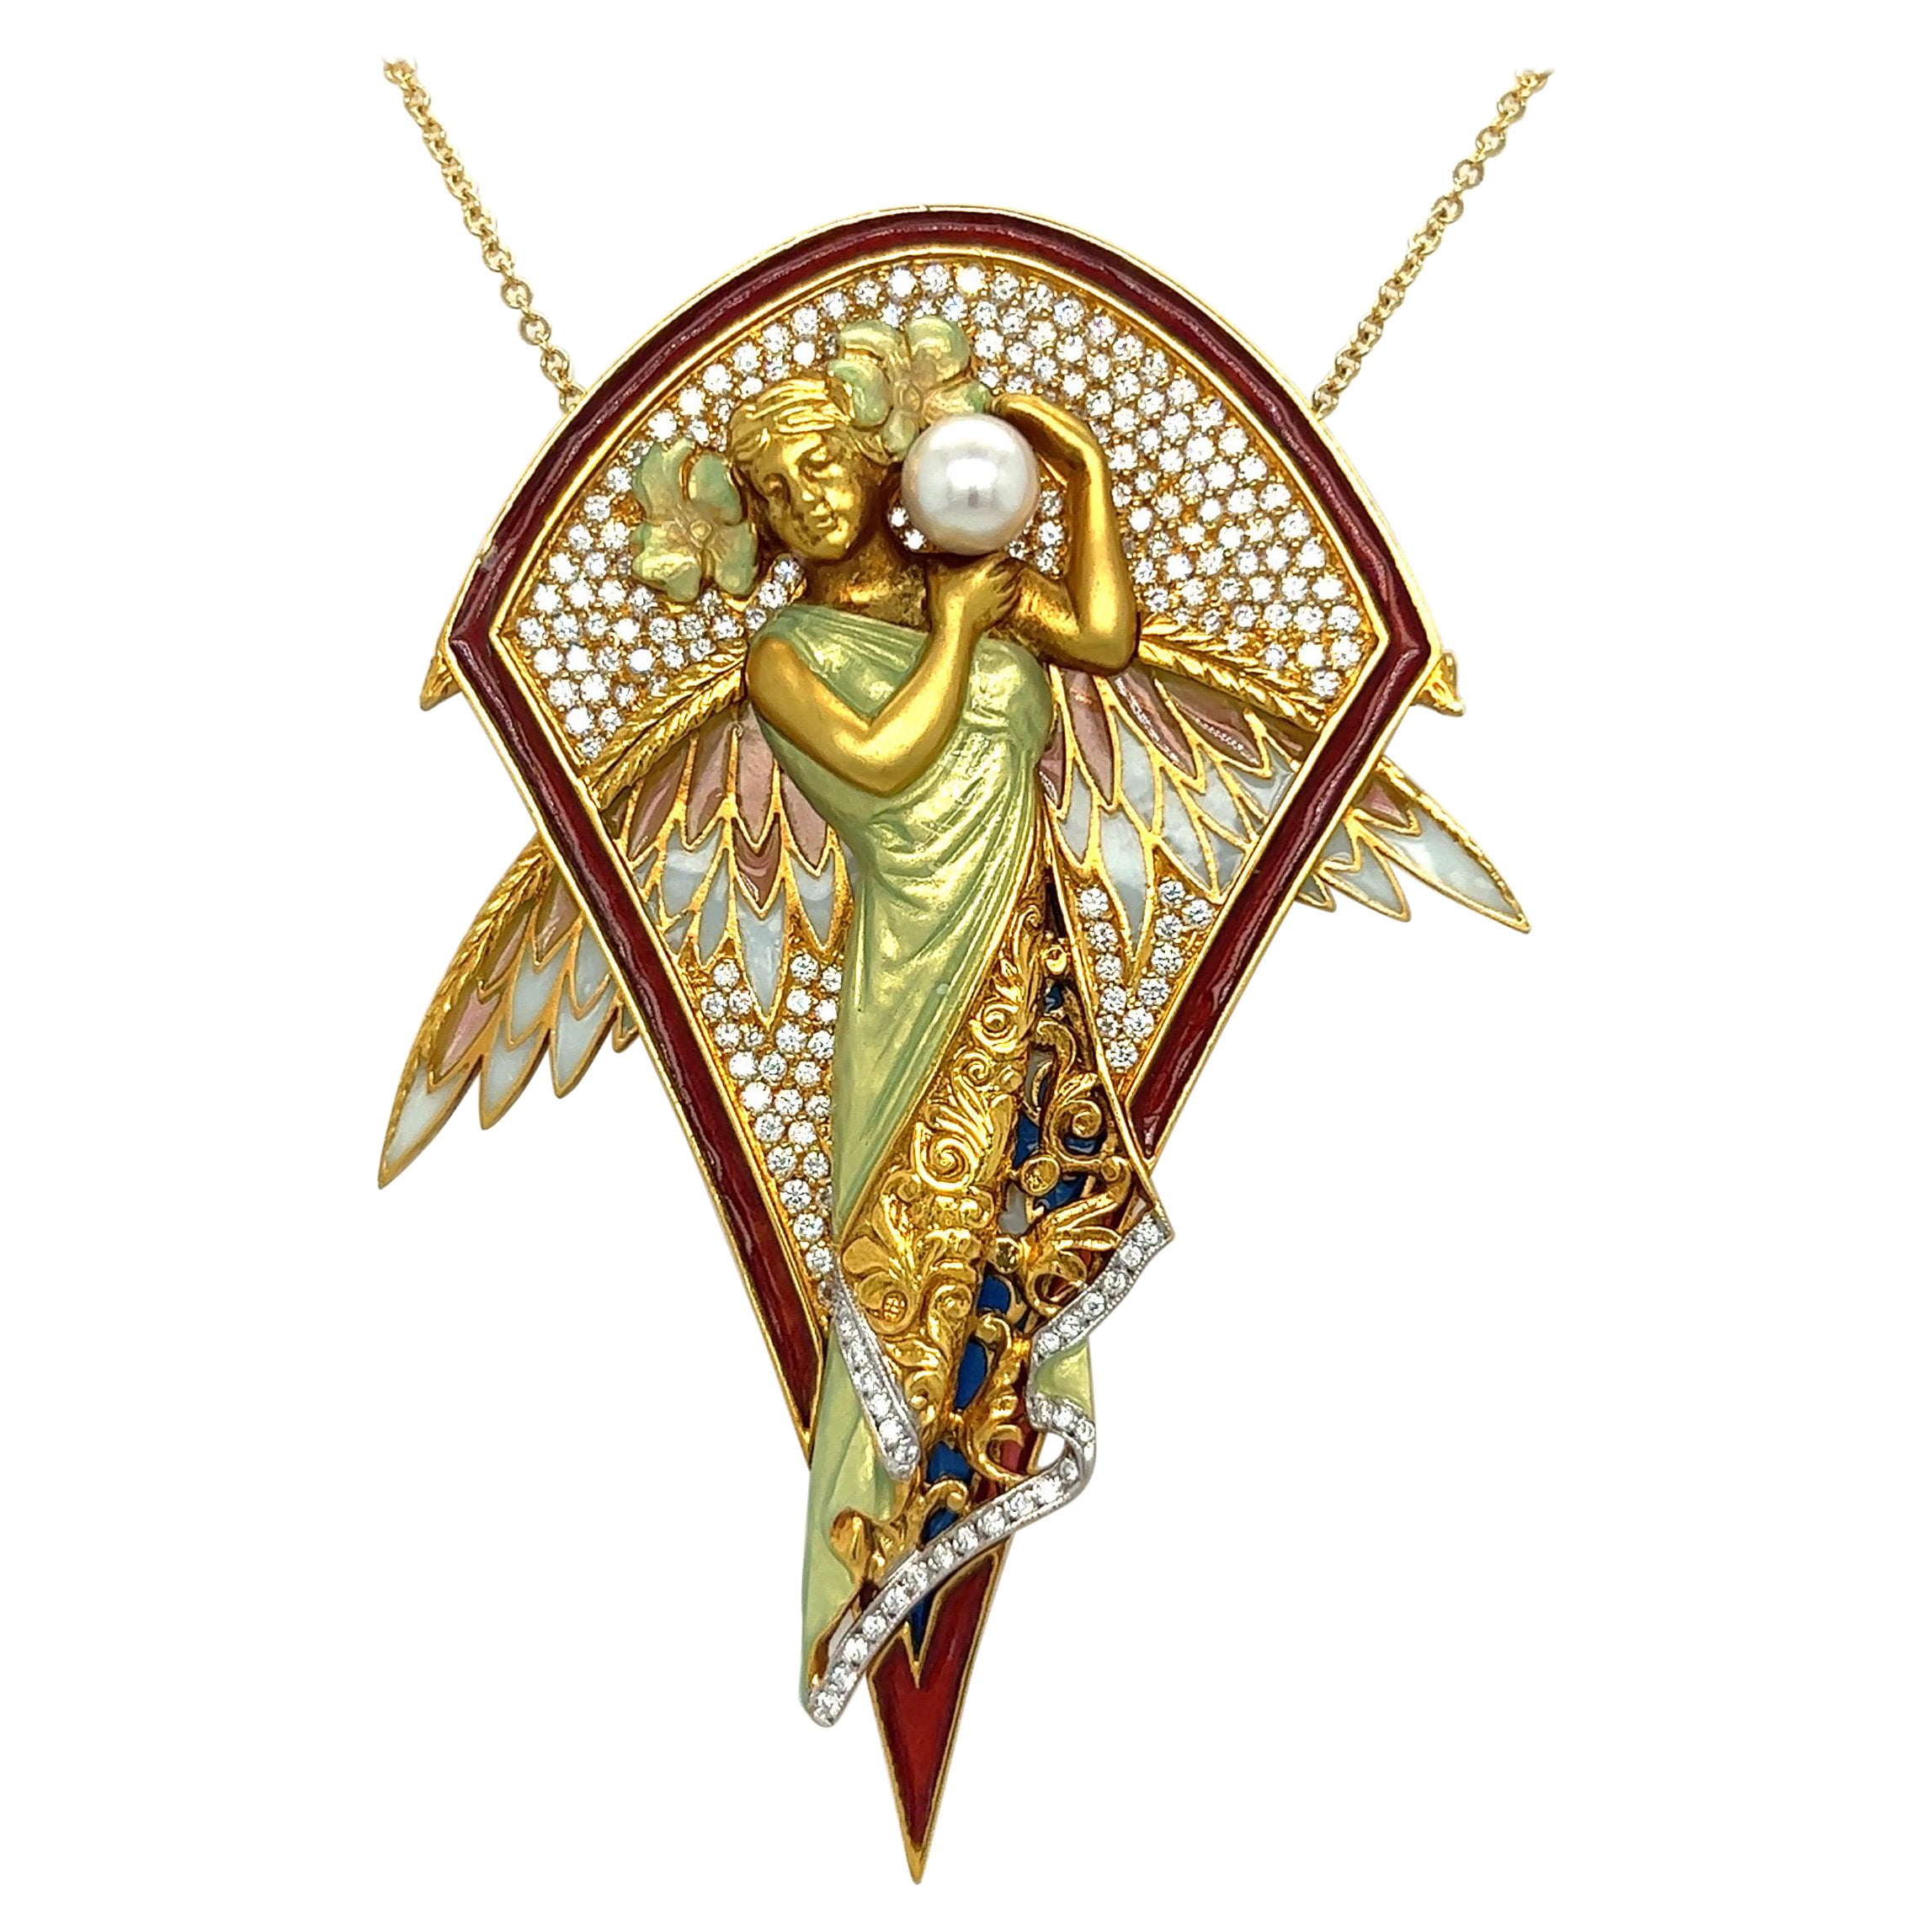 Masriera 18 KT YG Winged Nymph Brooch with Dia 1.94CT, Enamel and Pearls